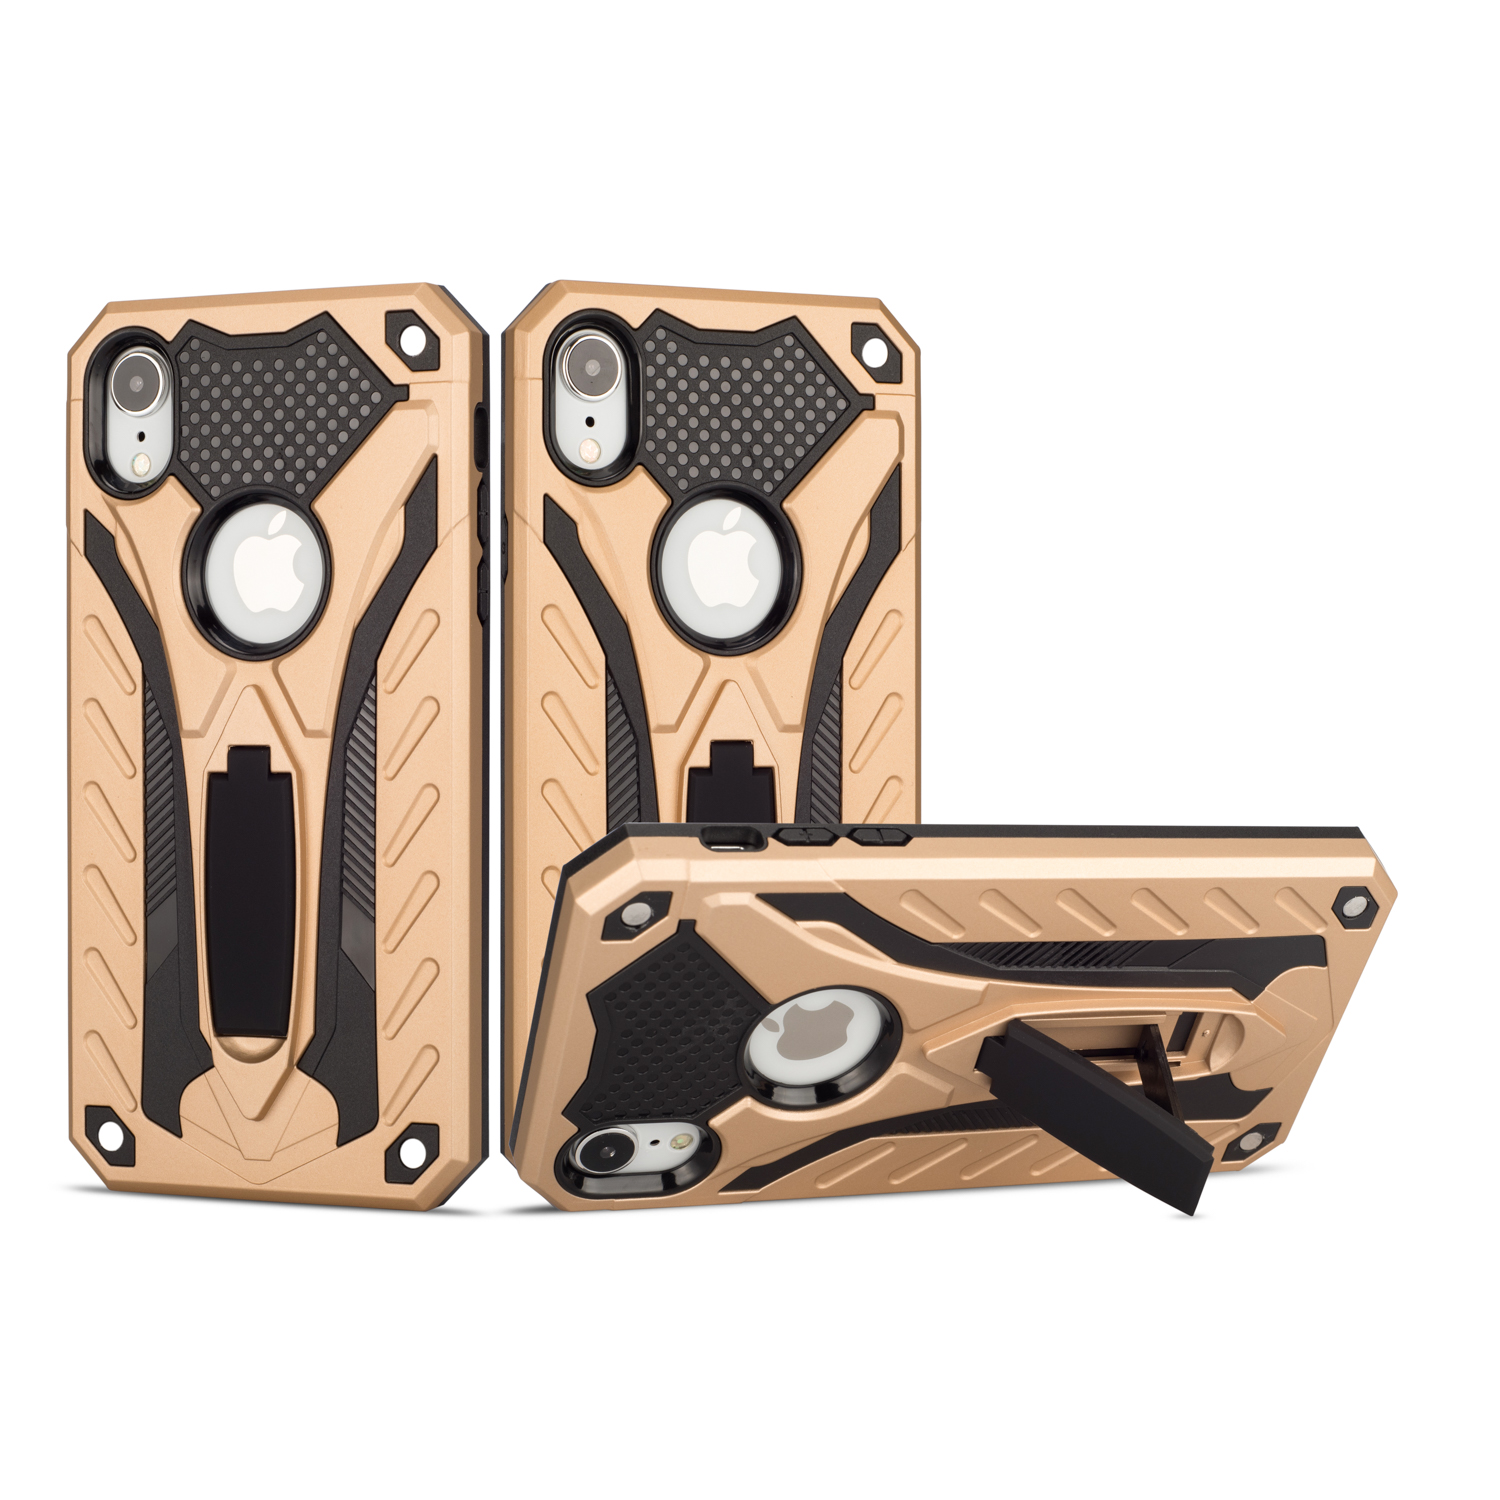 iPhone Xr 6.1in Armor Knight Kickstand Hybrid Case (GOLD)